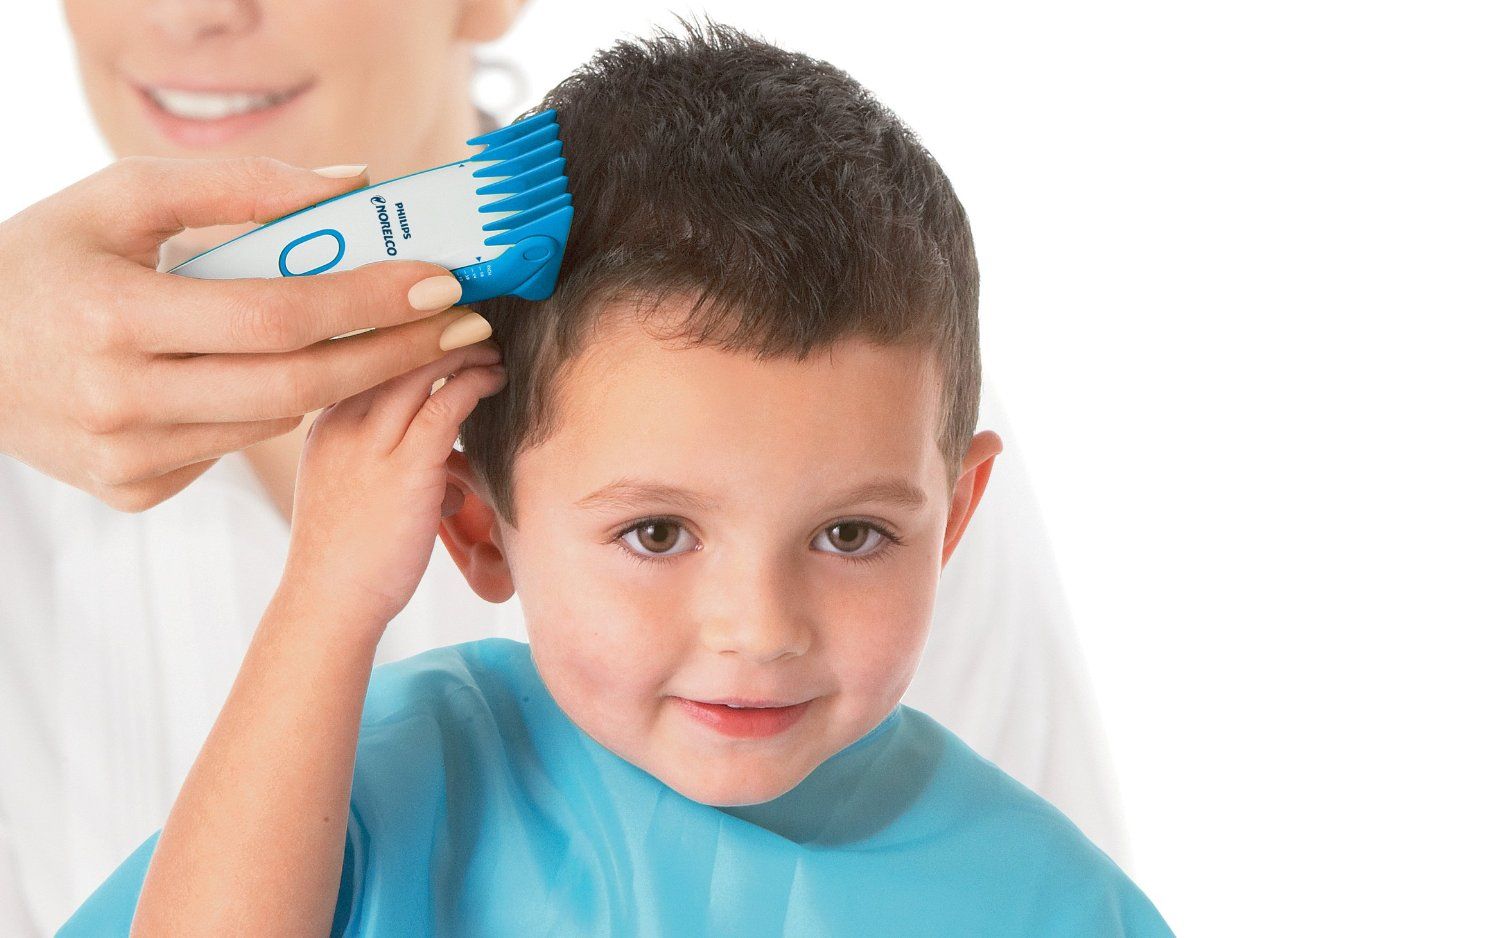 baby hair clippers